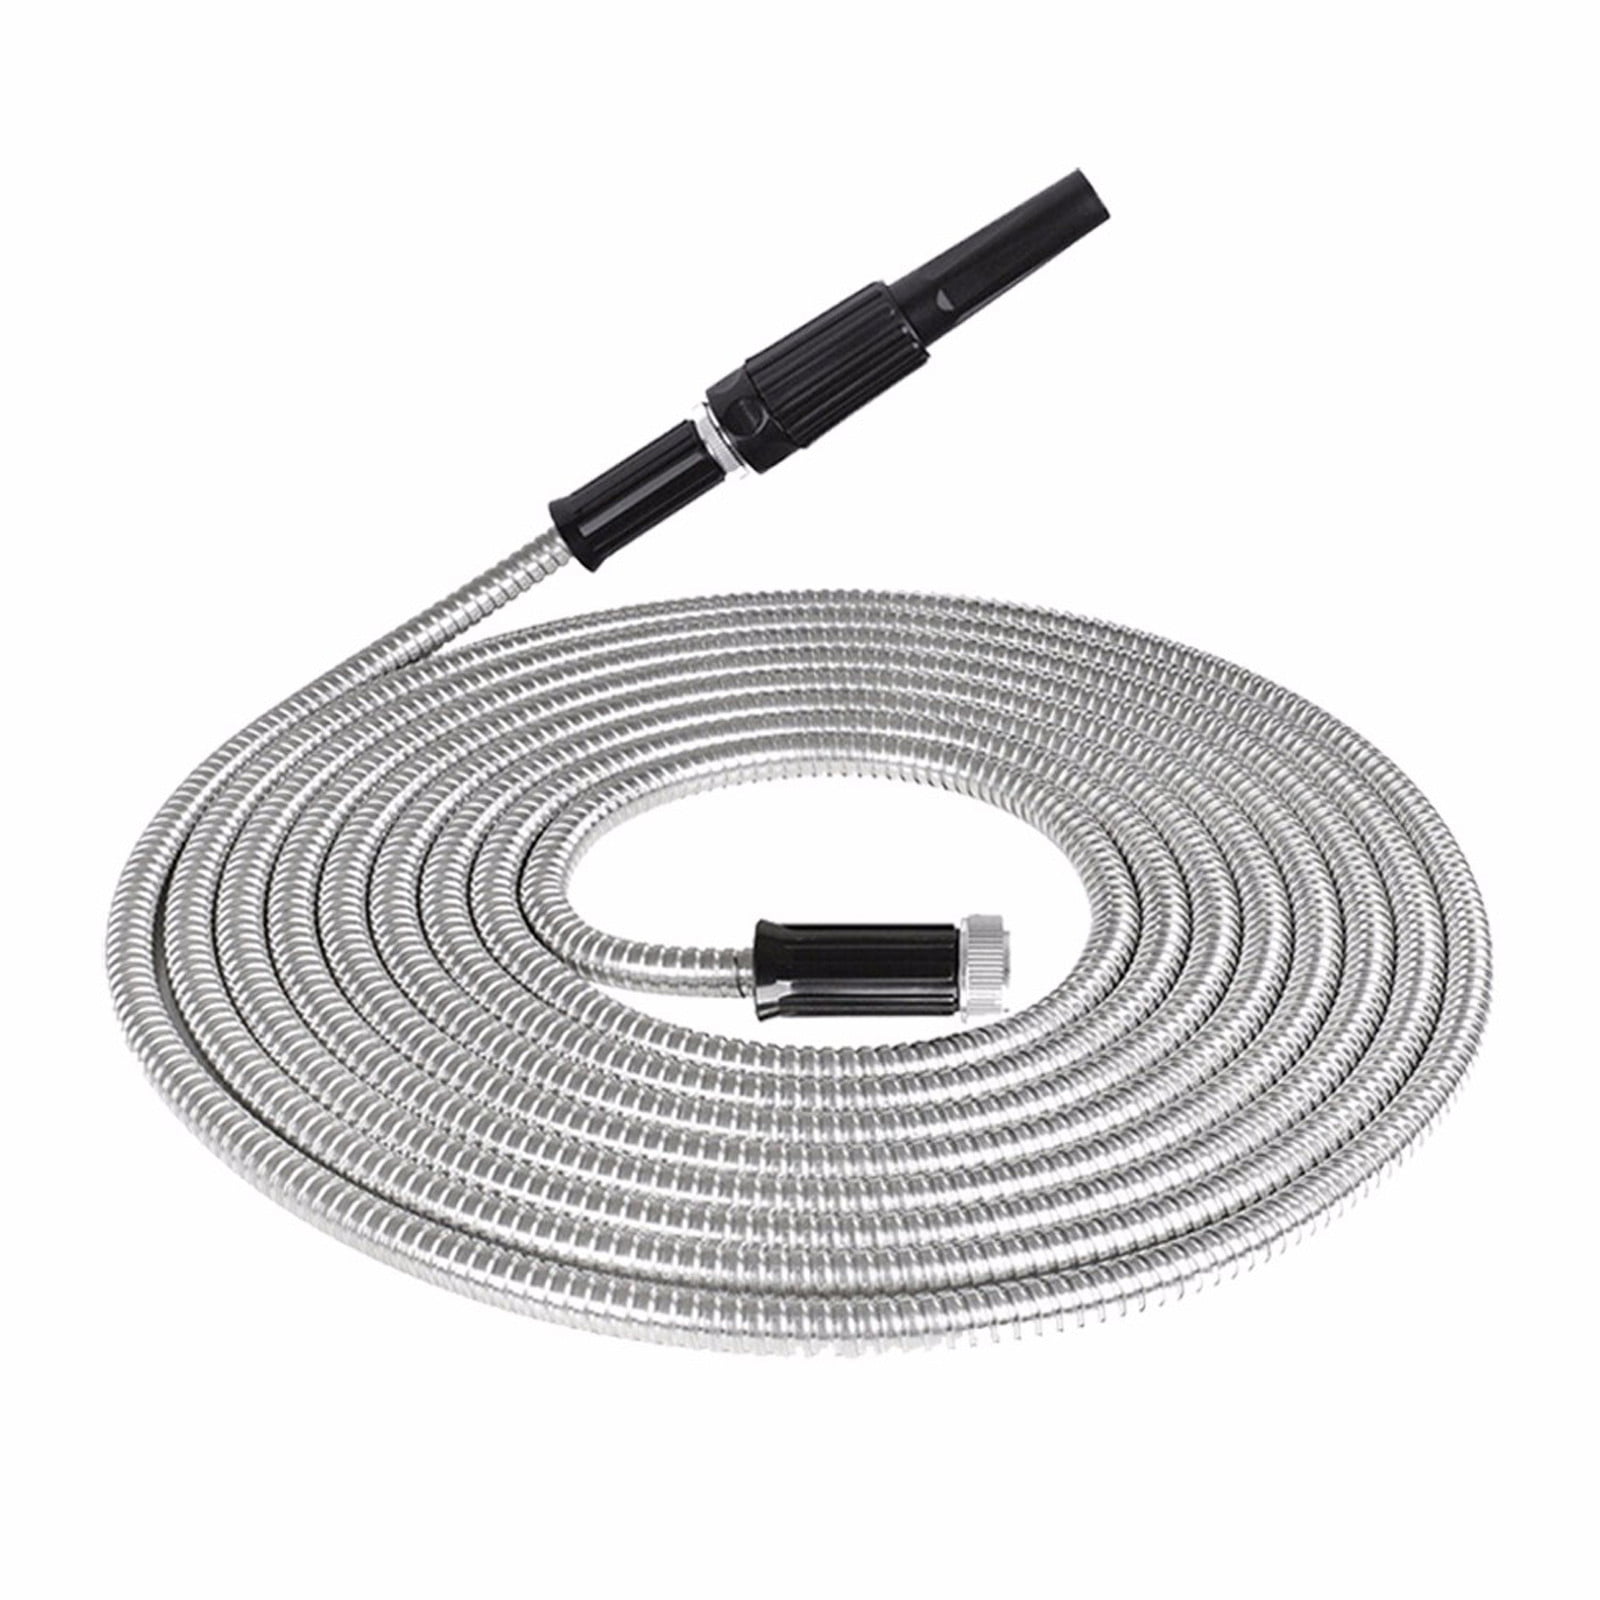 25/50/75/100ft Stainless Steel Flexible Metal Garden Water Hose Pipe+Nozzle Kit 